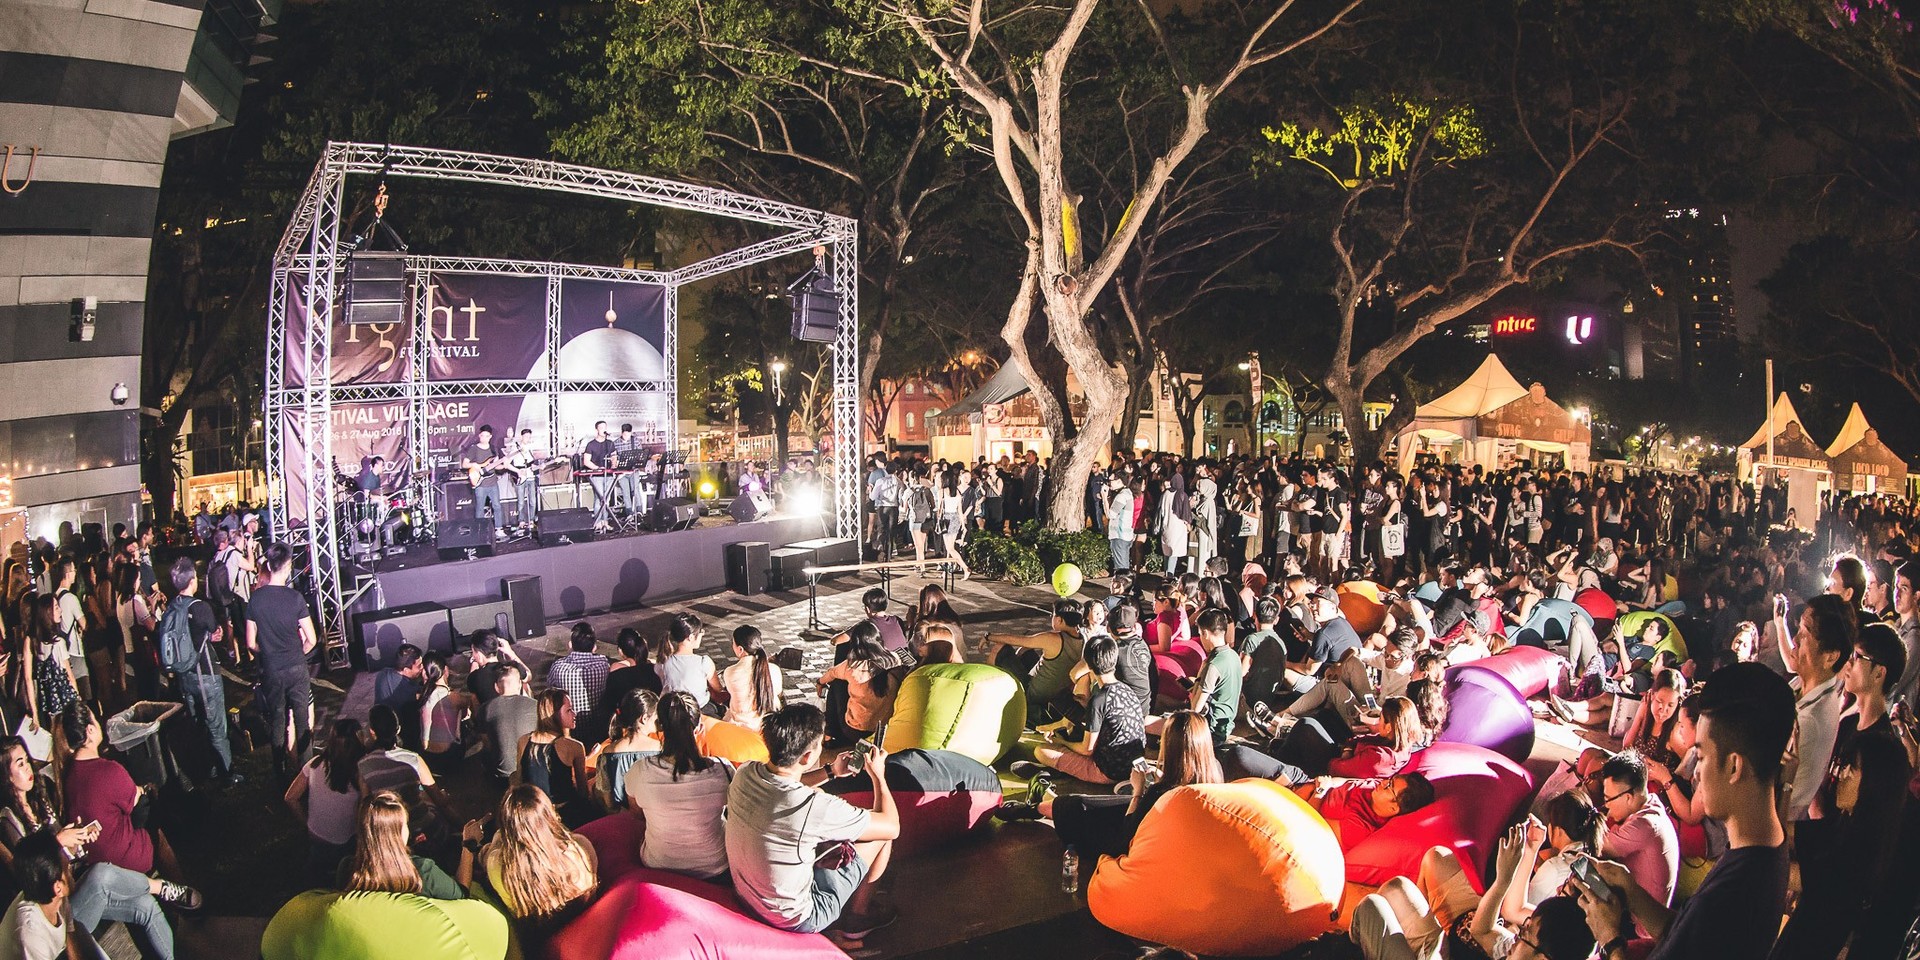 Singapore Night Festival celebrates 10th anniversary welcoming past artists 